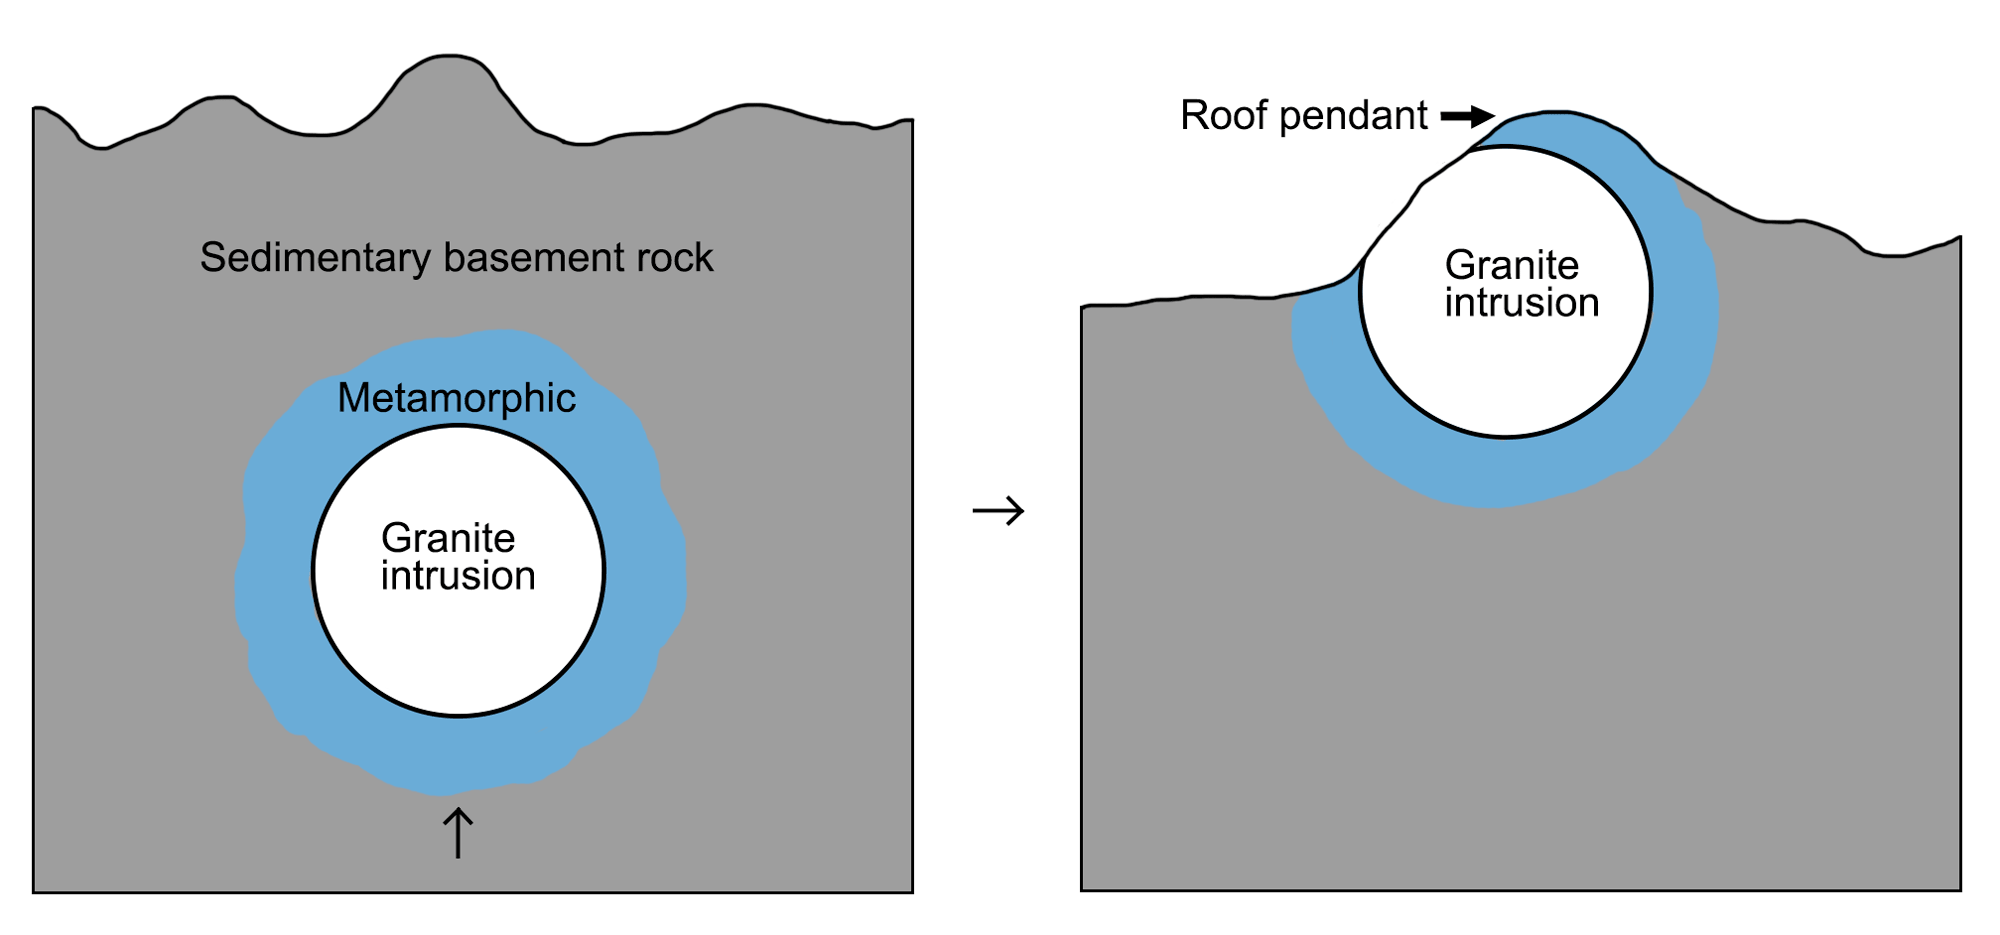 Simple diagram showing how a roof pendant forms.